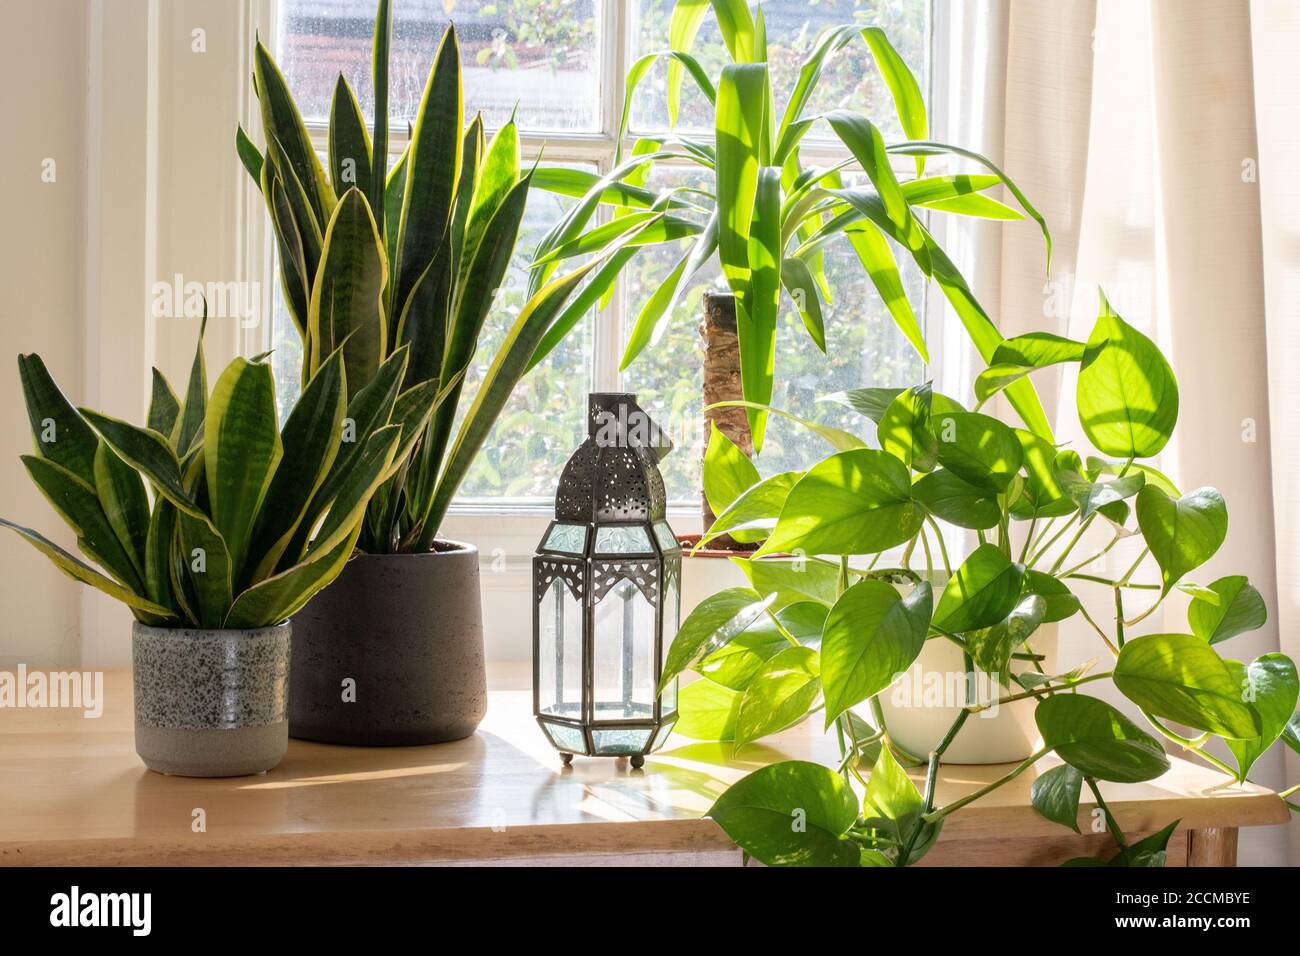 Indoor houseplants next to a window in a beautifully designed home or flat interior. Stock Photo